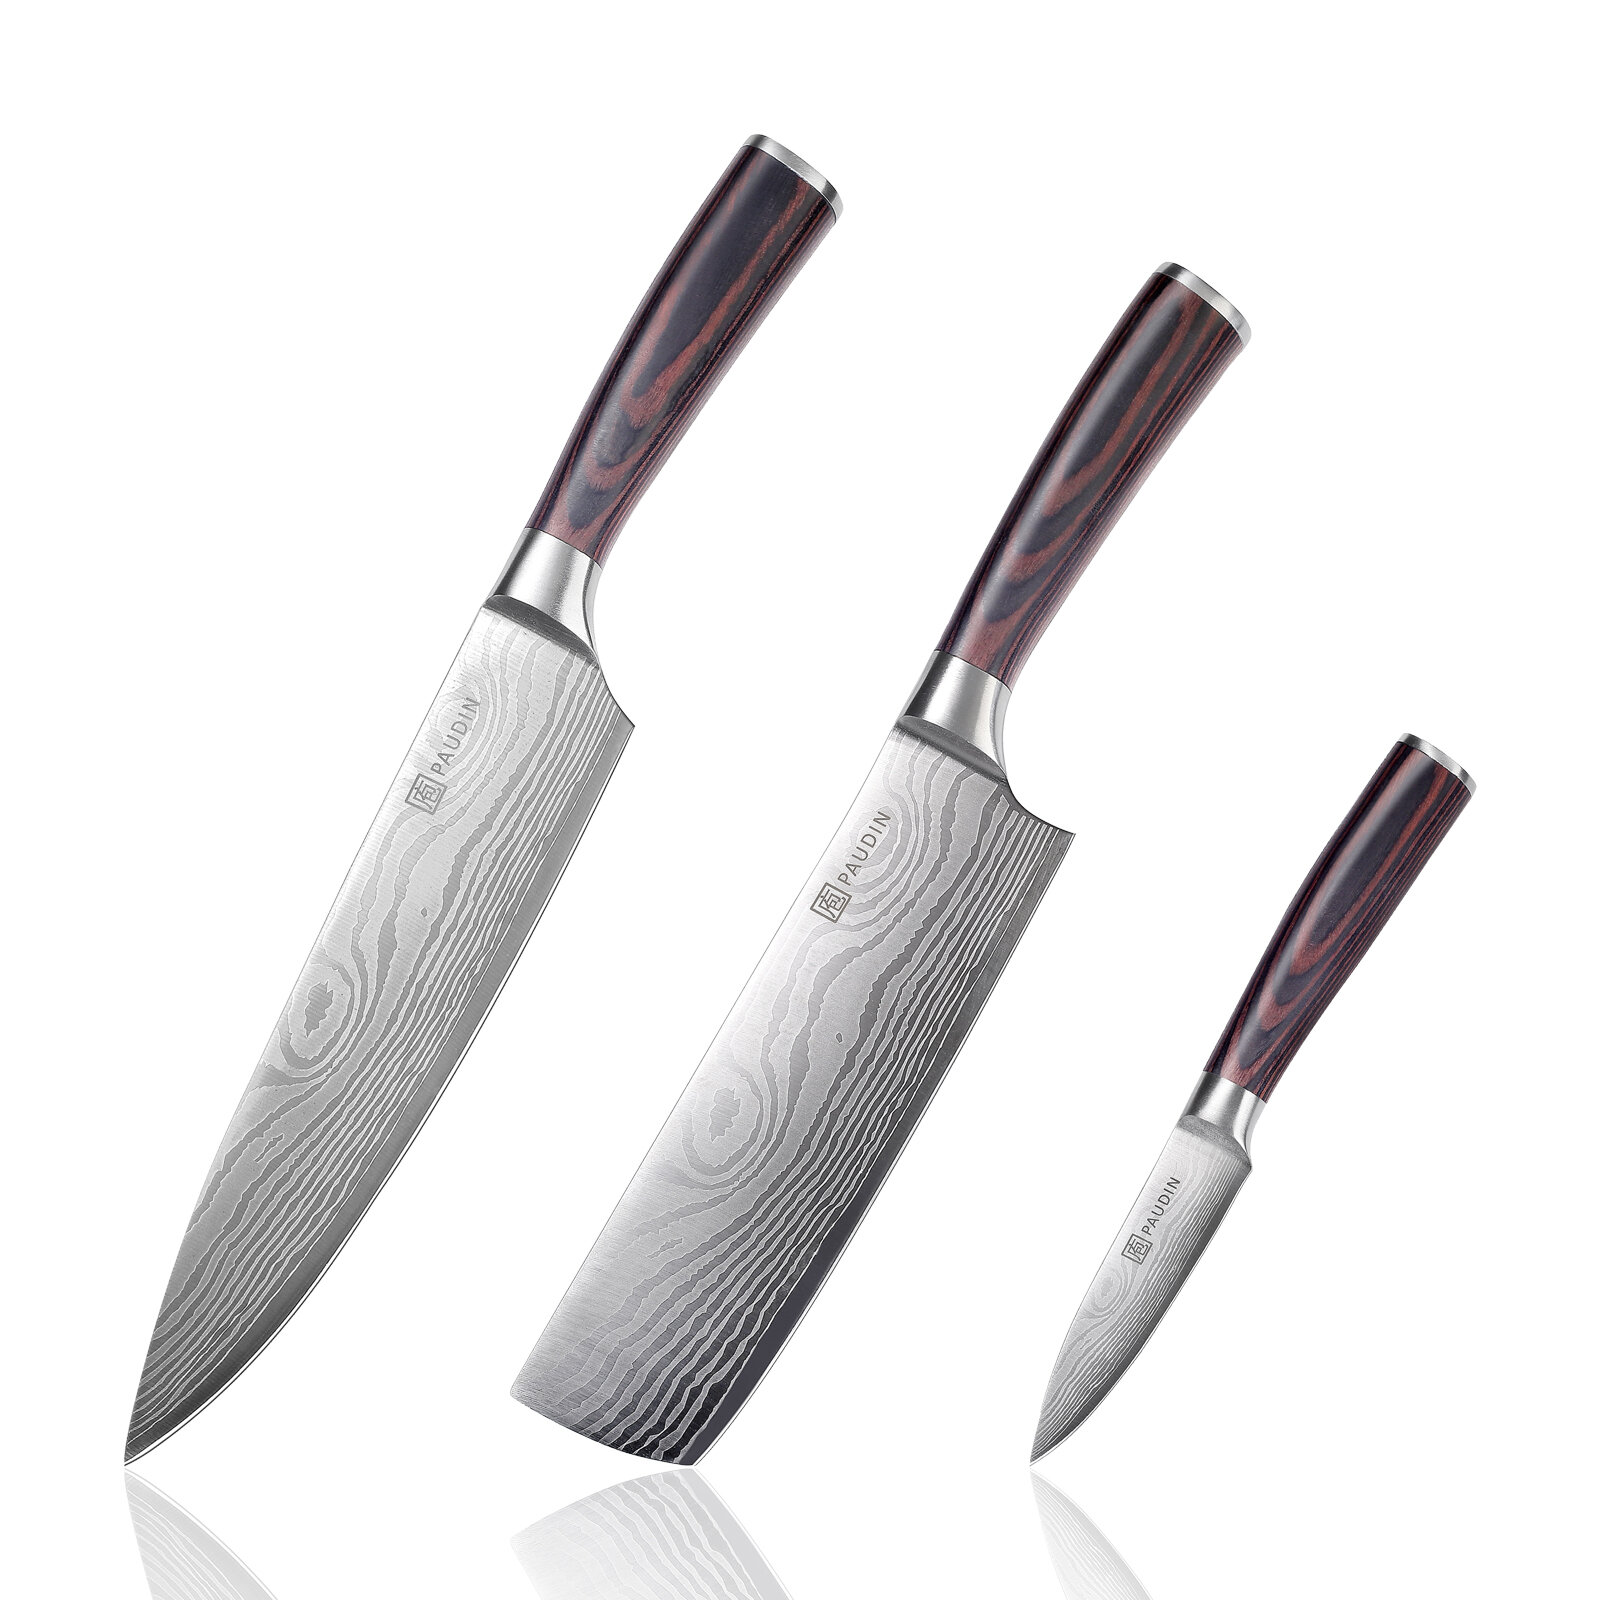 Yatoshi Cleaver Knife - Pro Kitchen Knife Set Ultra Sharp High Carbon  Stainless Steel